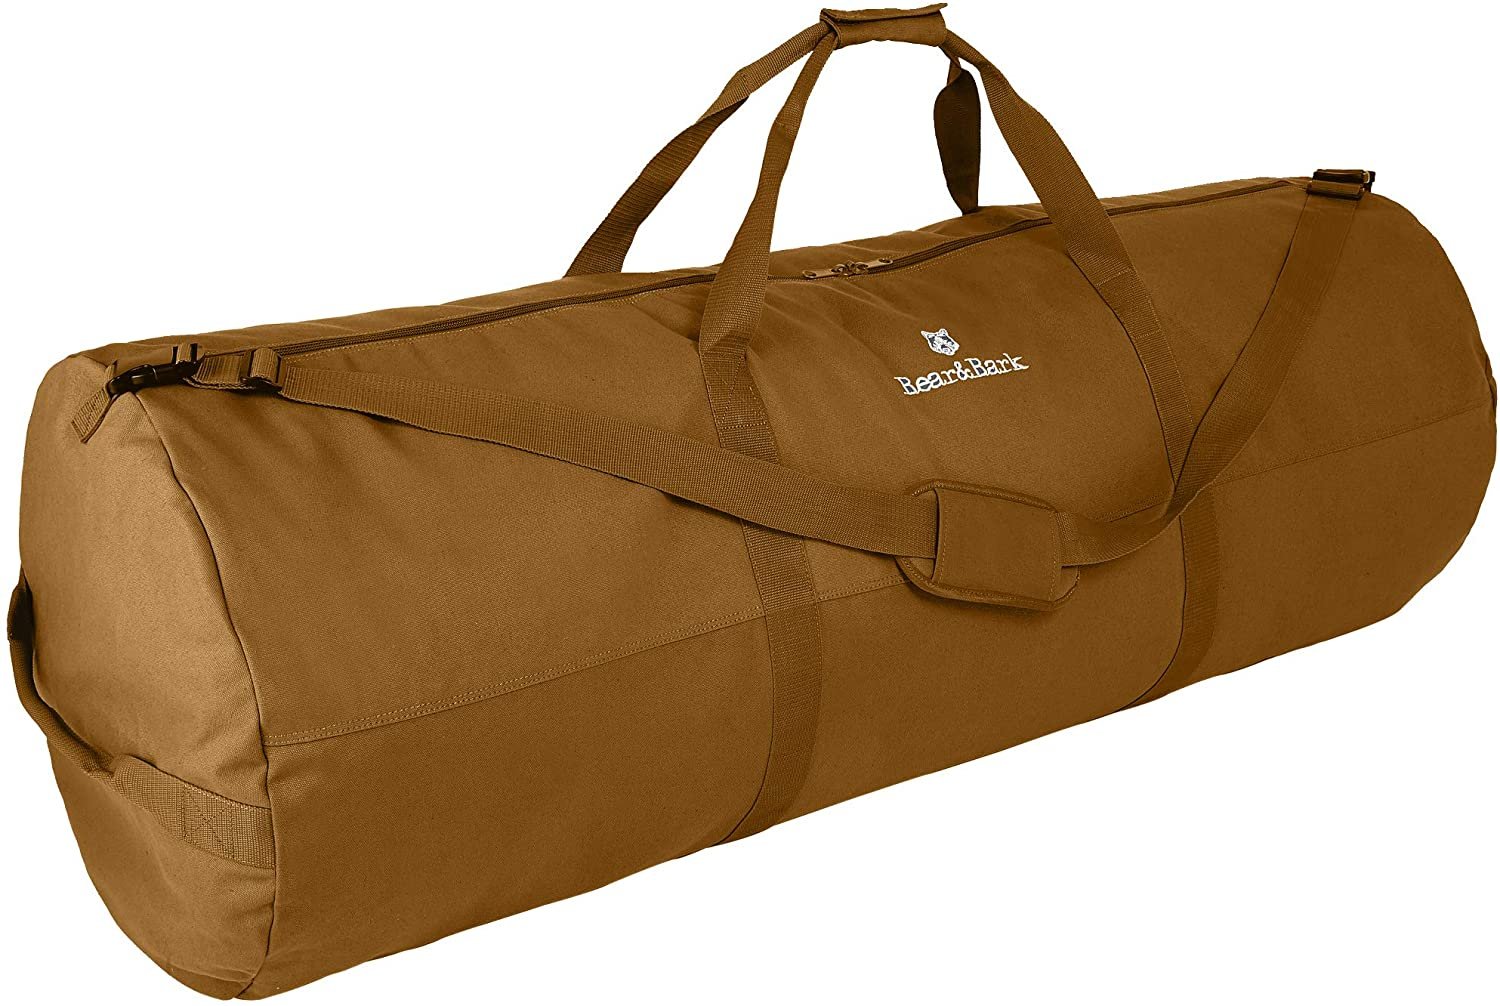 Blue Military Canvas Duffel Bag - 32x18 - Army Cargo Style Carryall for Men/Women - Free Shipping & Returns